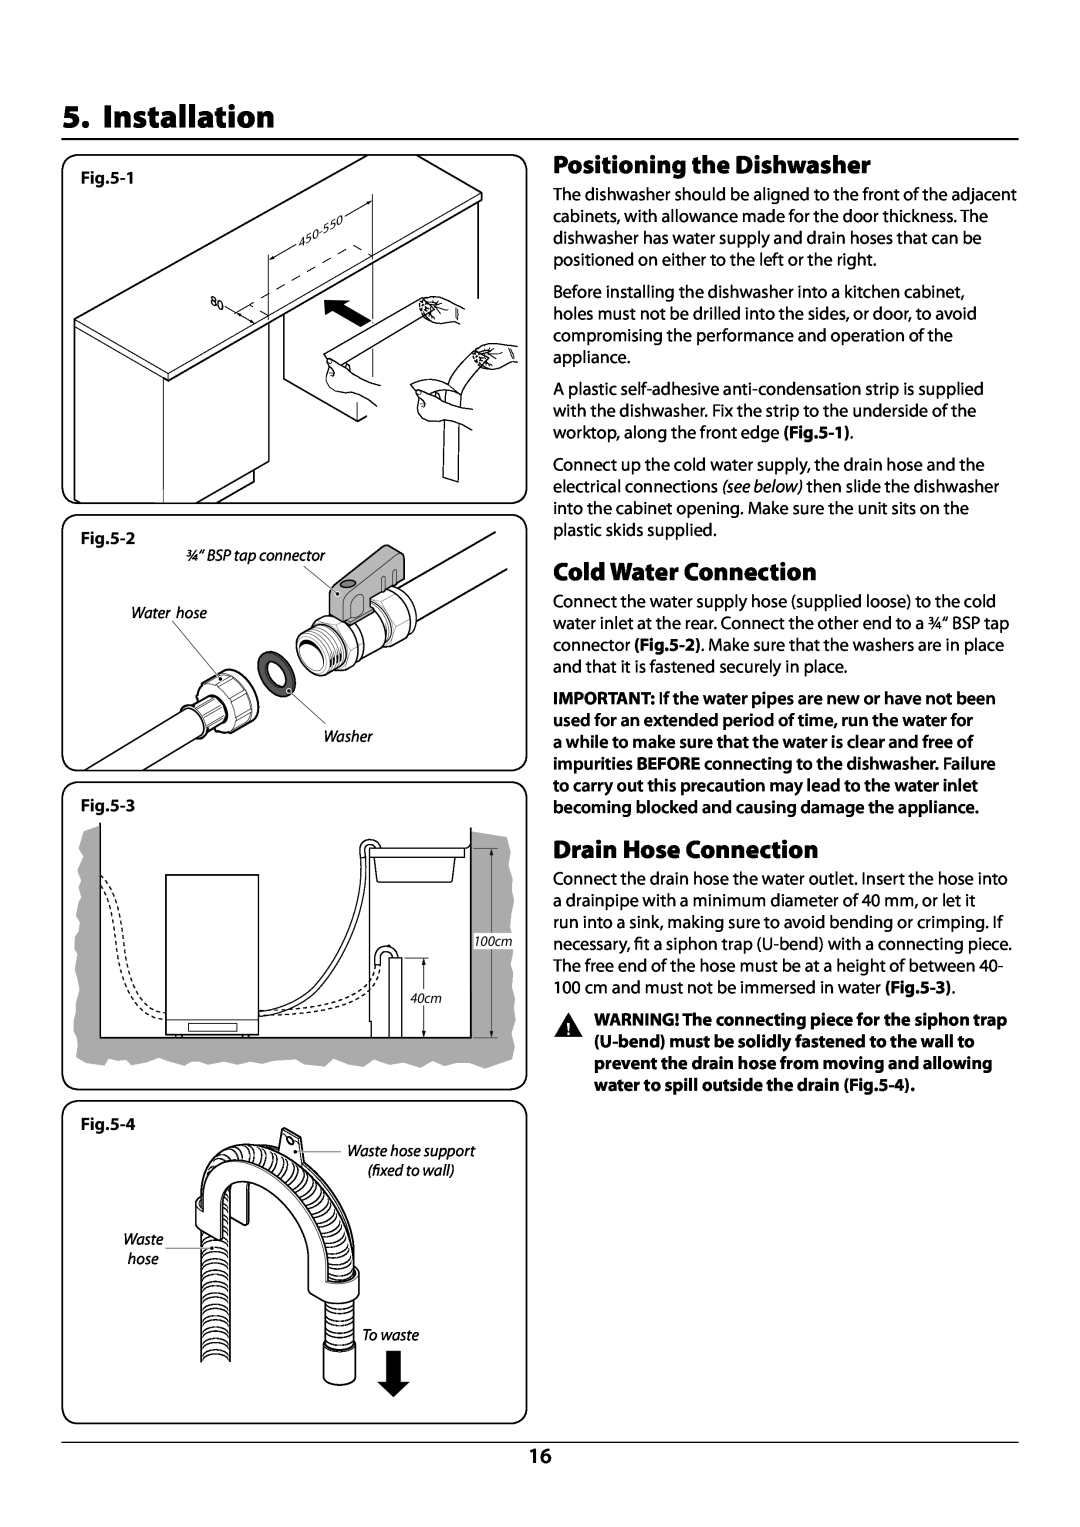 Rangemaster RDW459FI/SF manual Installation, Positioning the Dishwasher, Cold Water Connection, Drain Hose Connection 